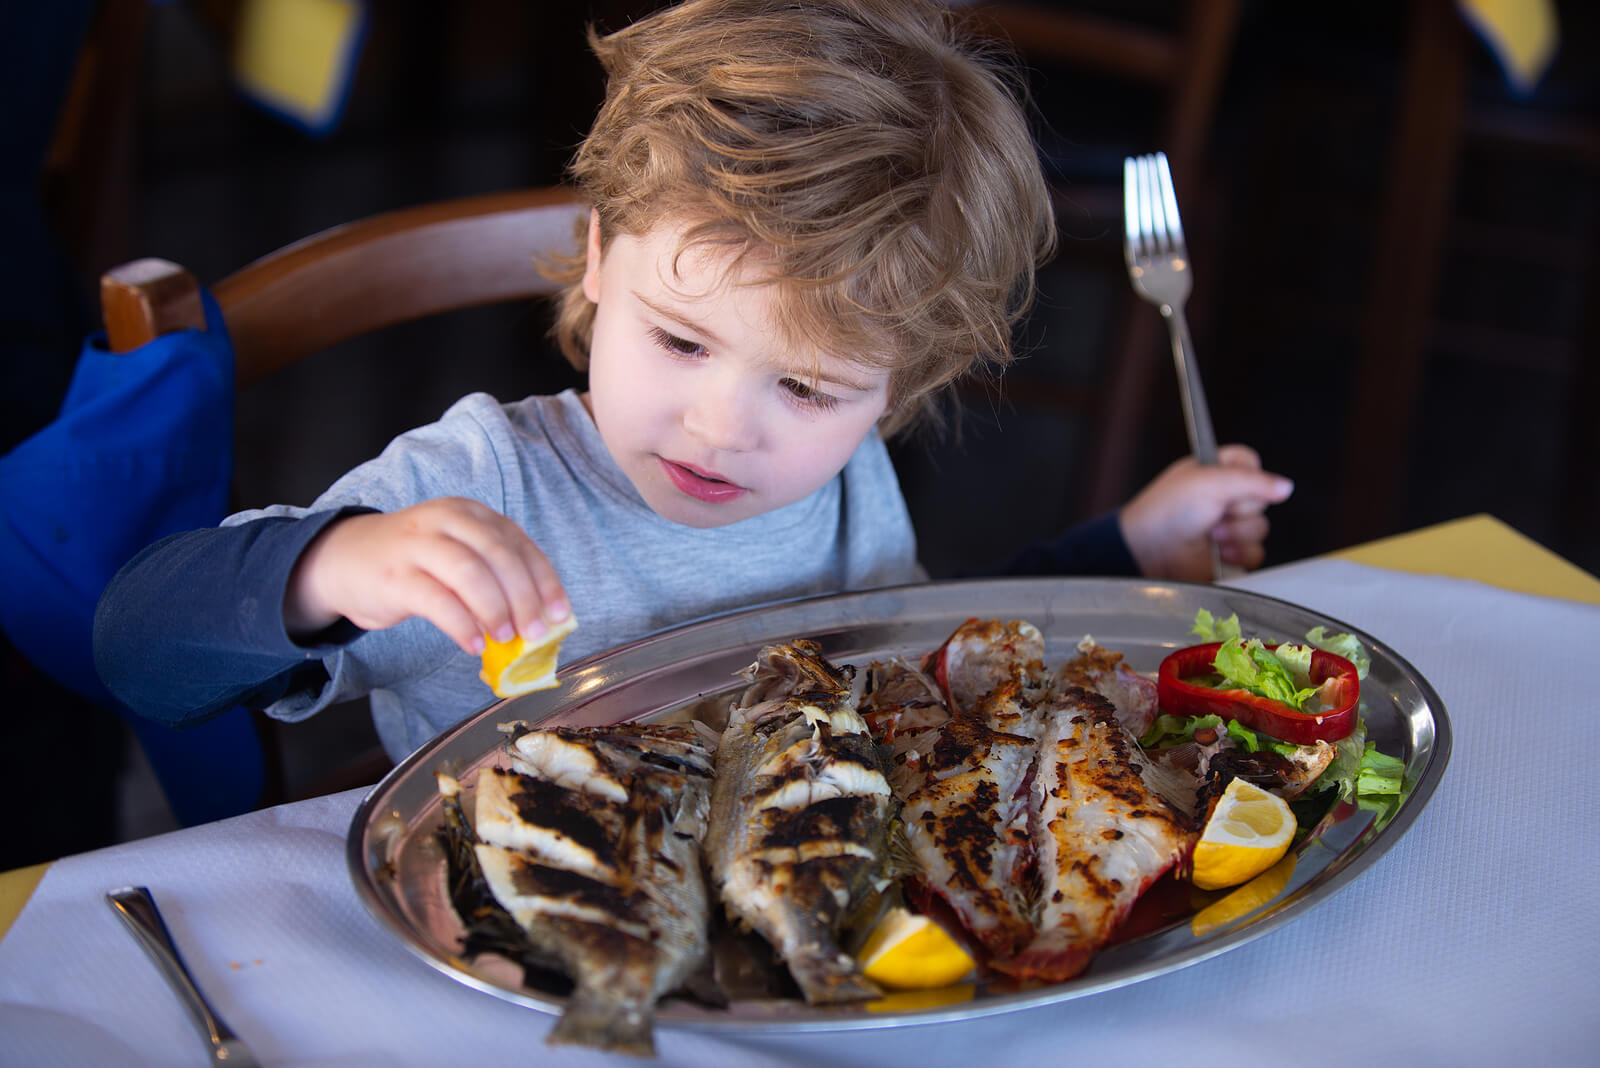 A child squeezing lemon onto grilled fish.